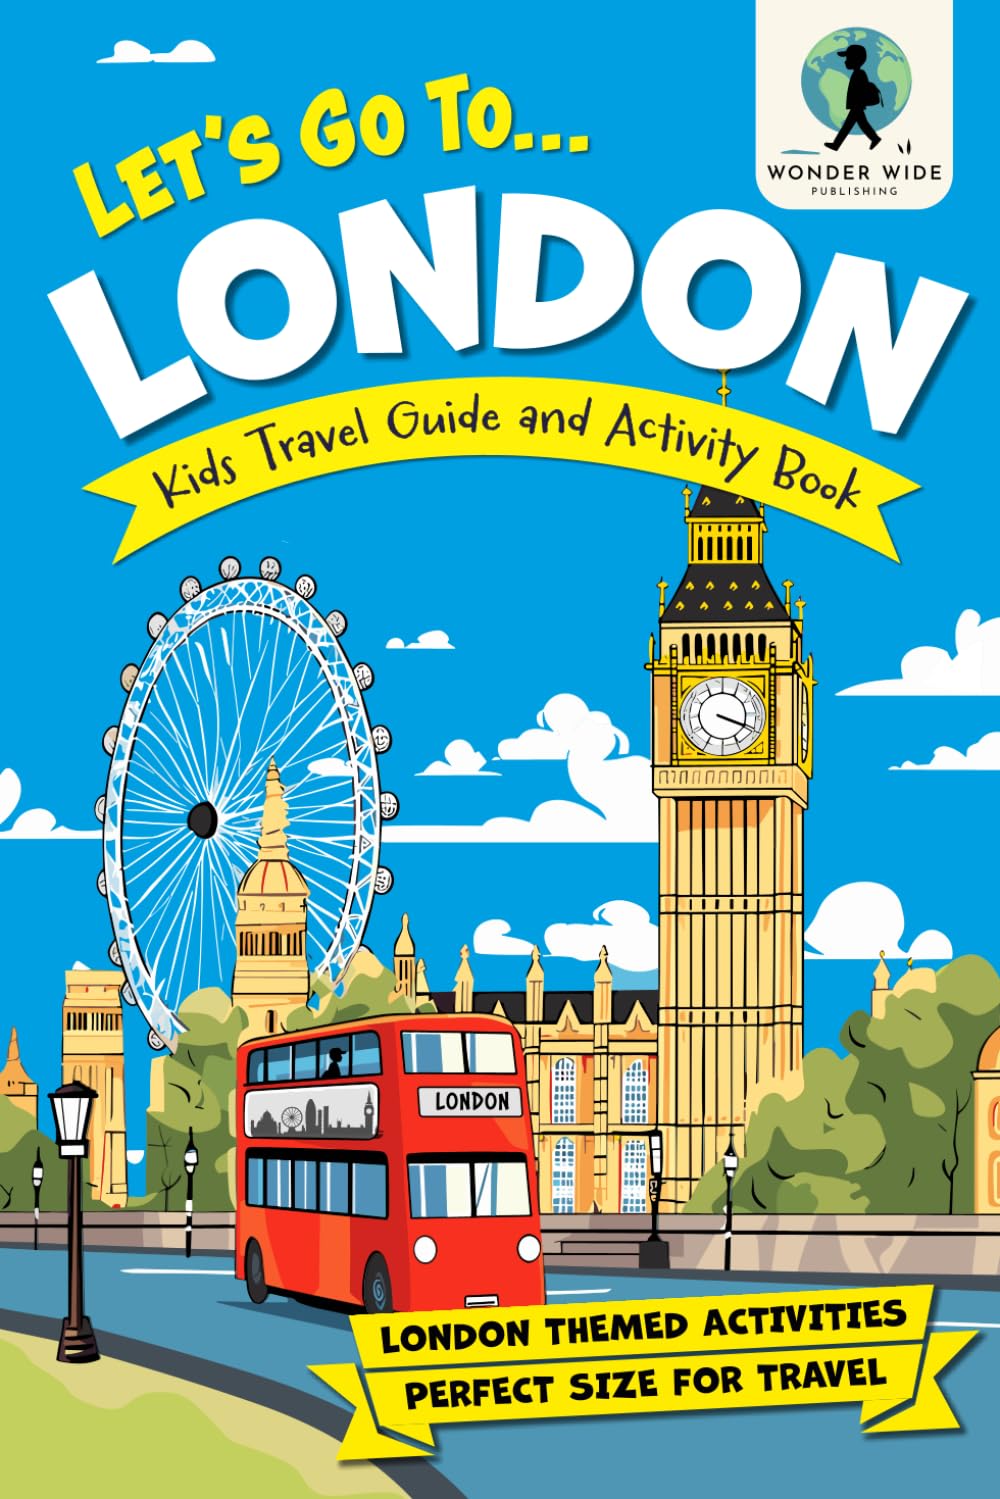 Let’s Go To London: Kids Activity Book and Travel Guide — Feature Packed London Themed Activities and Fun Facts (Let's Go... Kids Travel Guides and Activity Books)